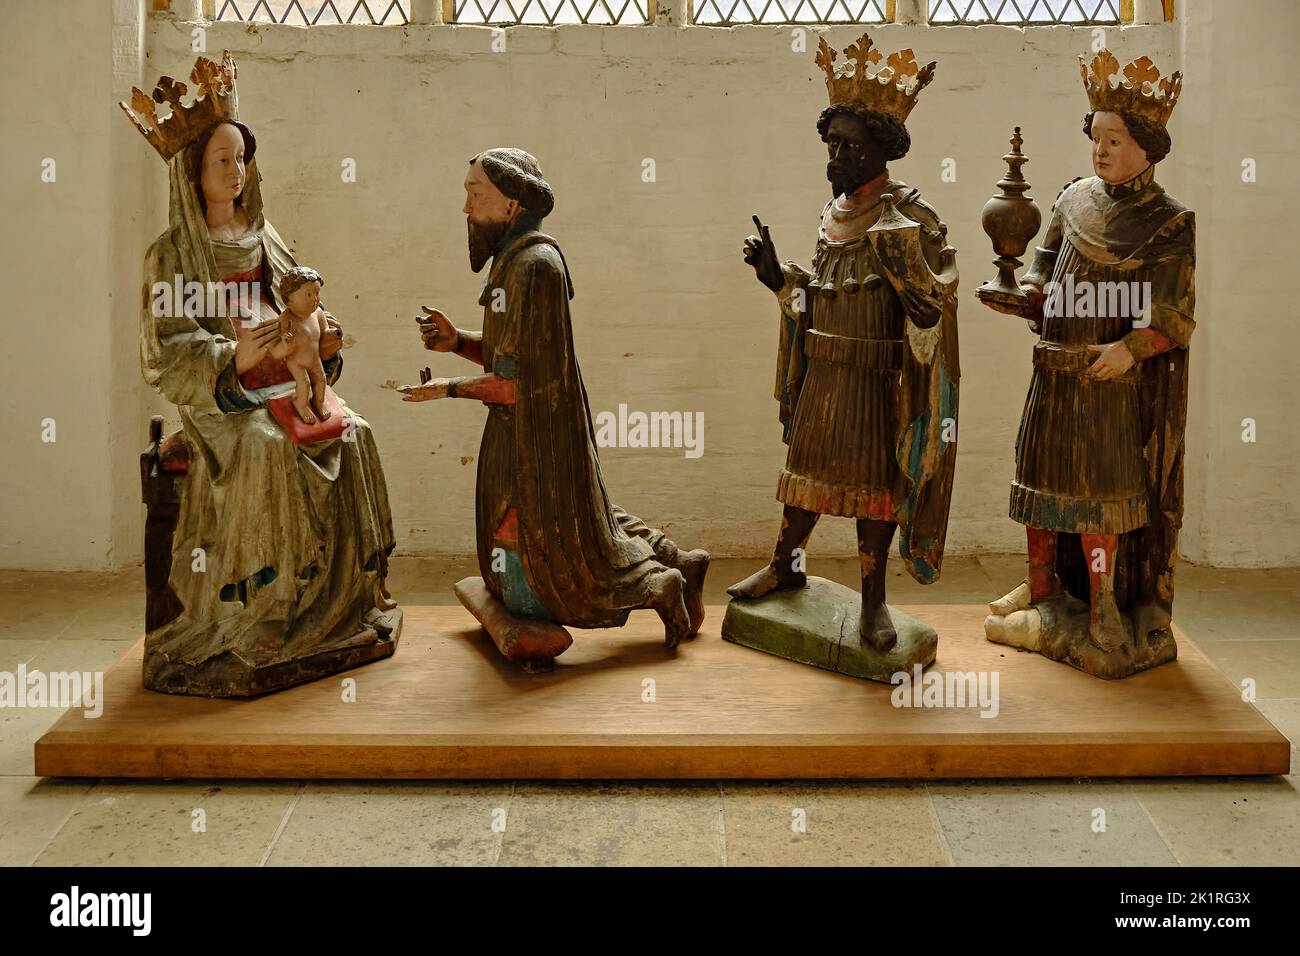 Adoration of the Magi, 15th century Epiphany group in the Church of the Holy Spirit in the Old Town of the Hanseatic Town of Wismar, Germany. Stock Photo